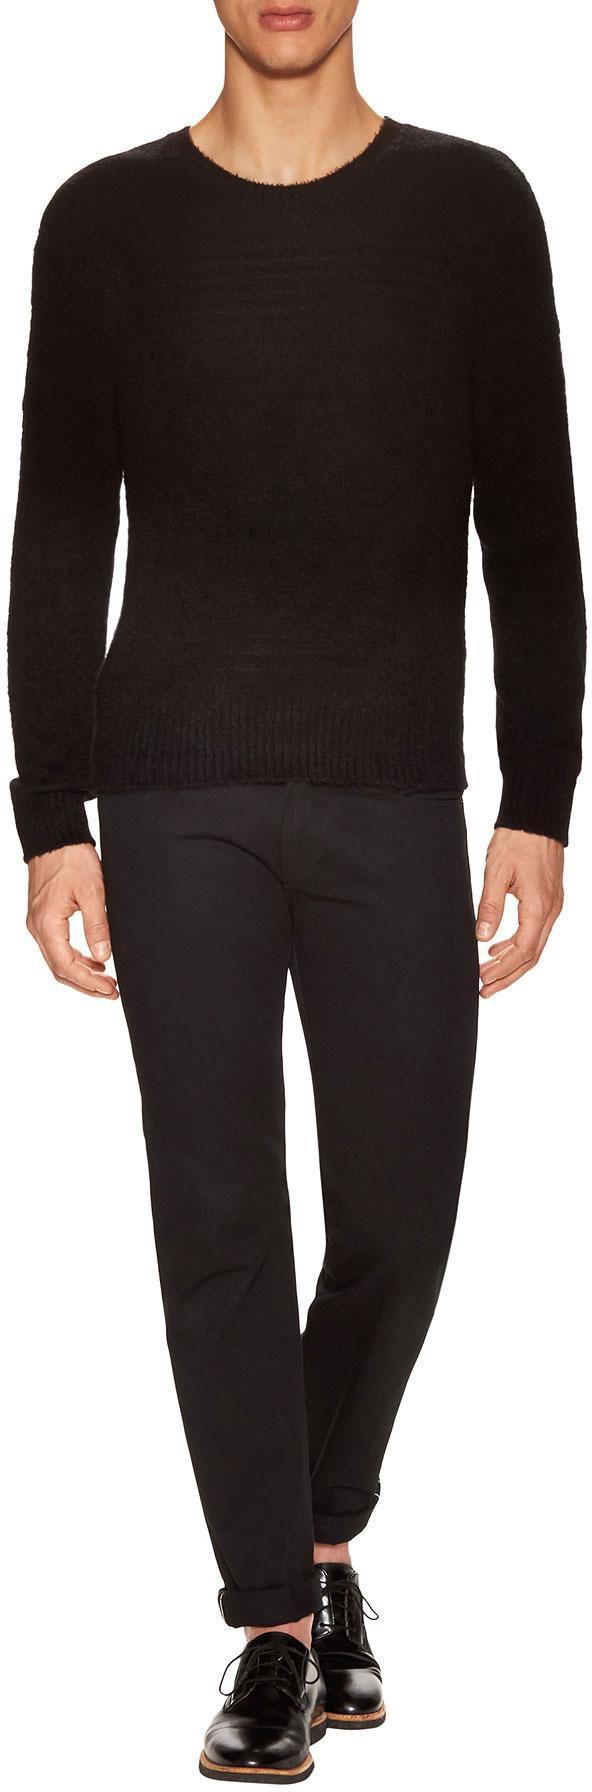 7 For All Mankind - Solid Stripe Sweater